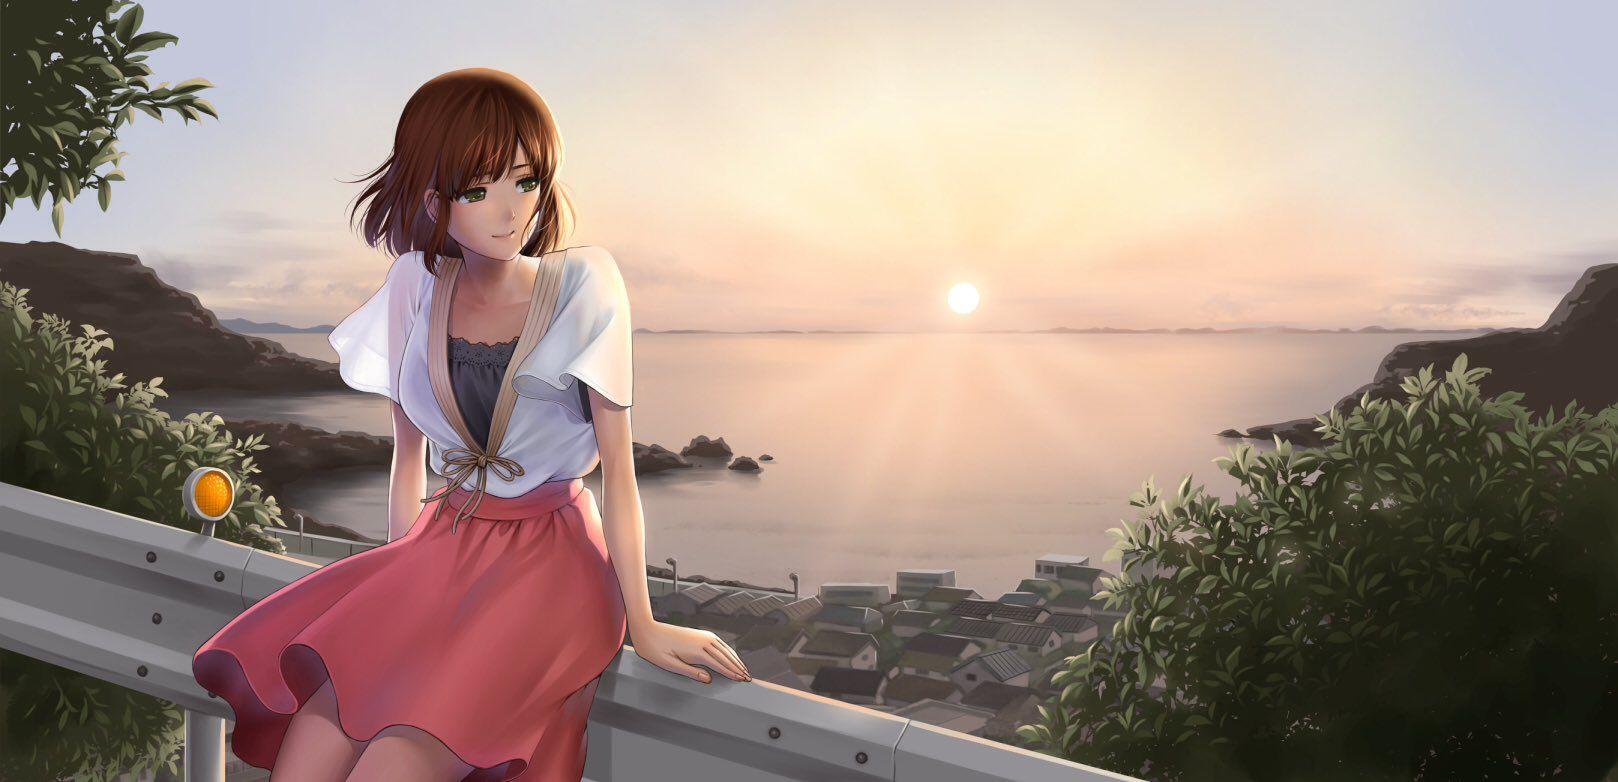 20+ Domestic Girlfriend HD Wallpapers and Backgrounds